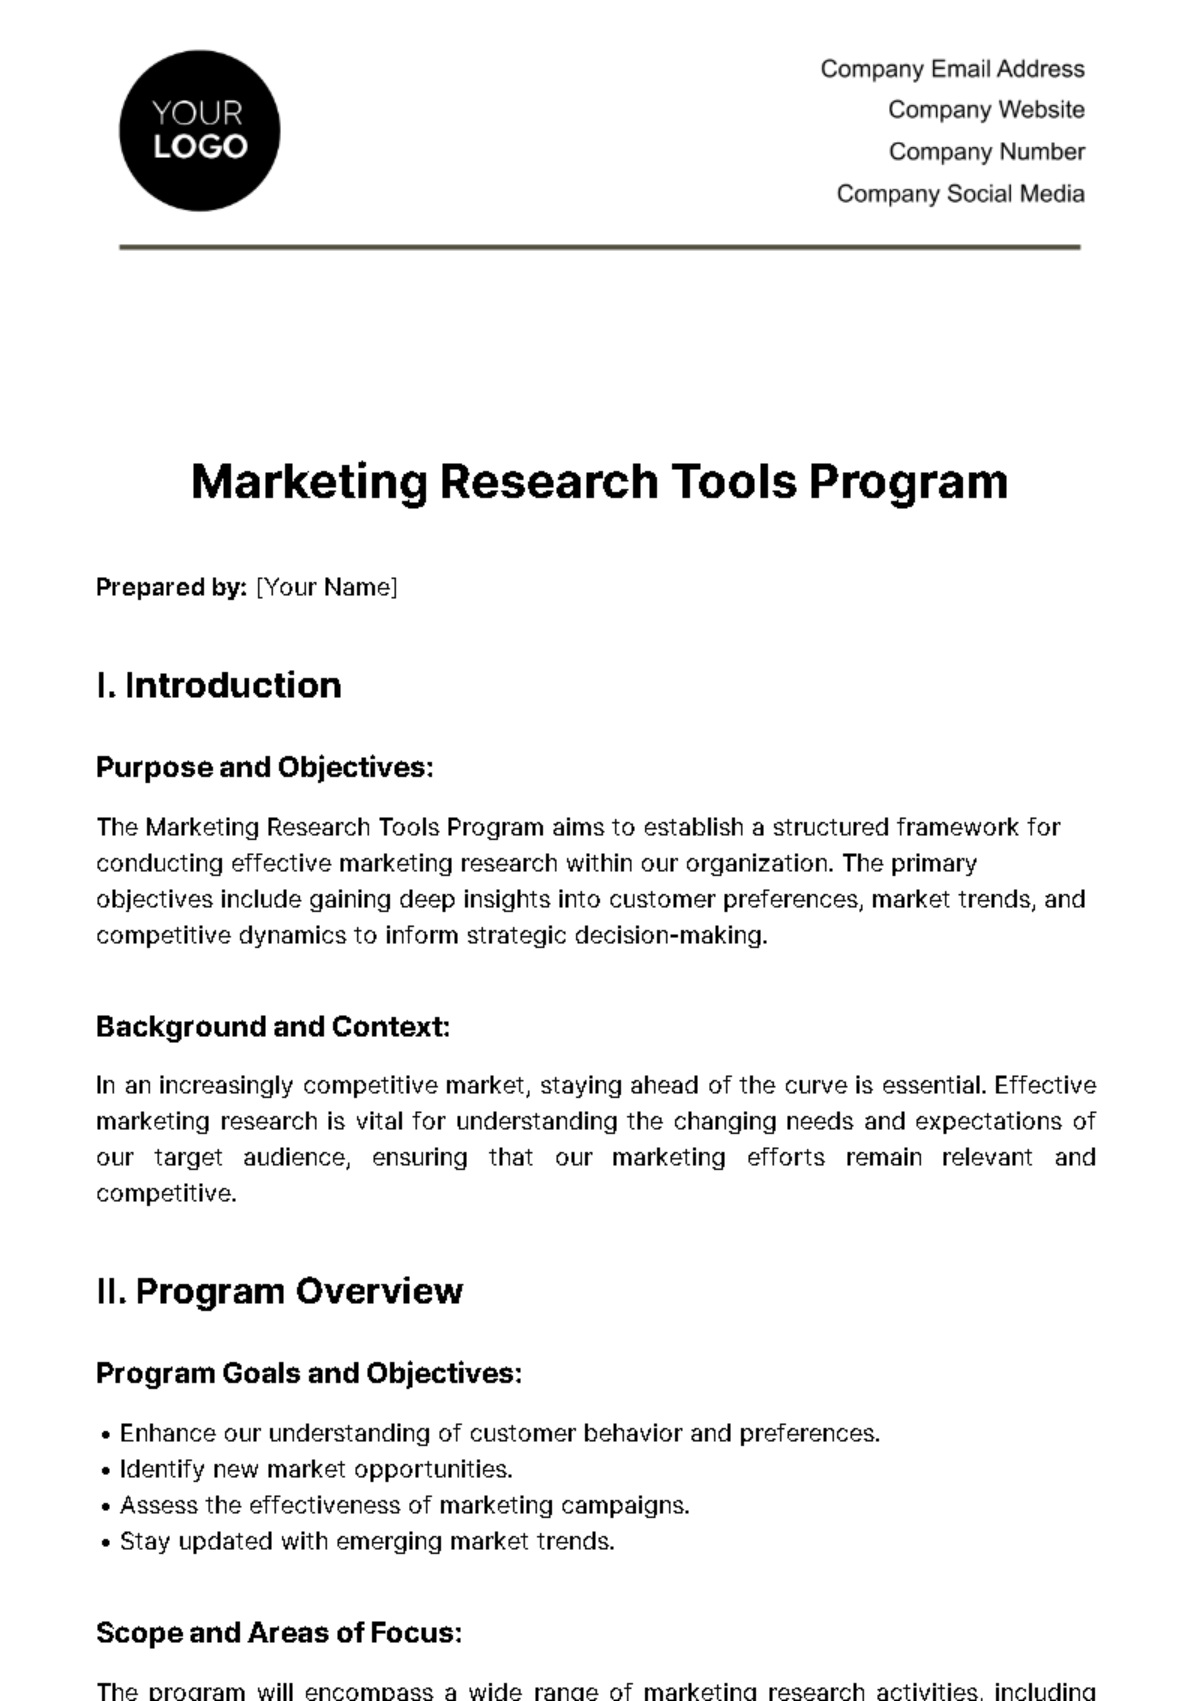 Free Marketing Research Tools Program Template